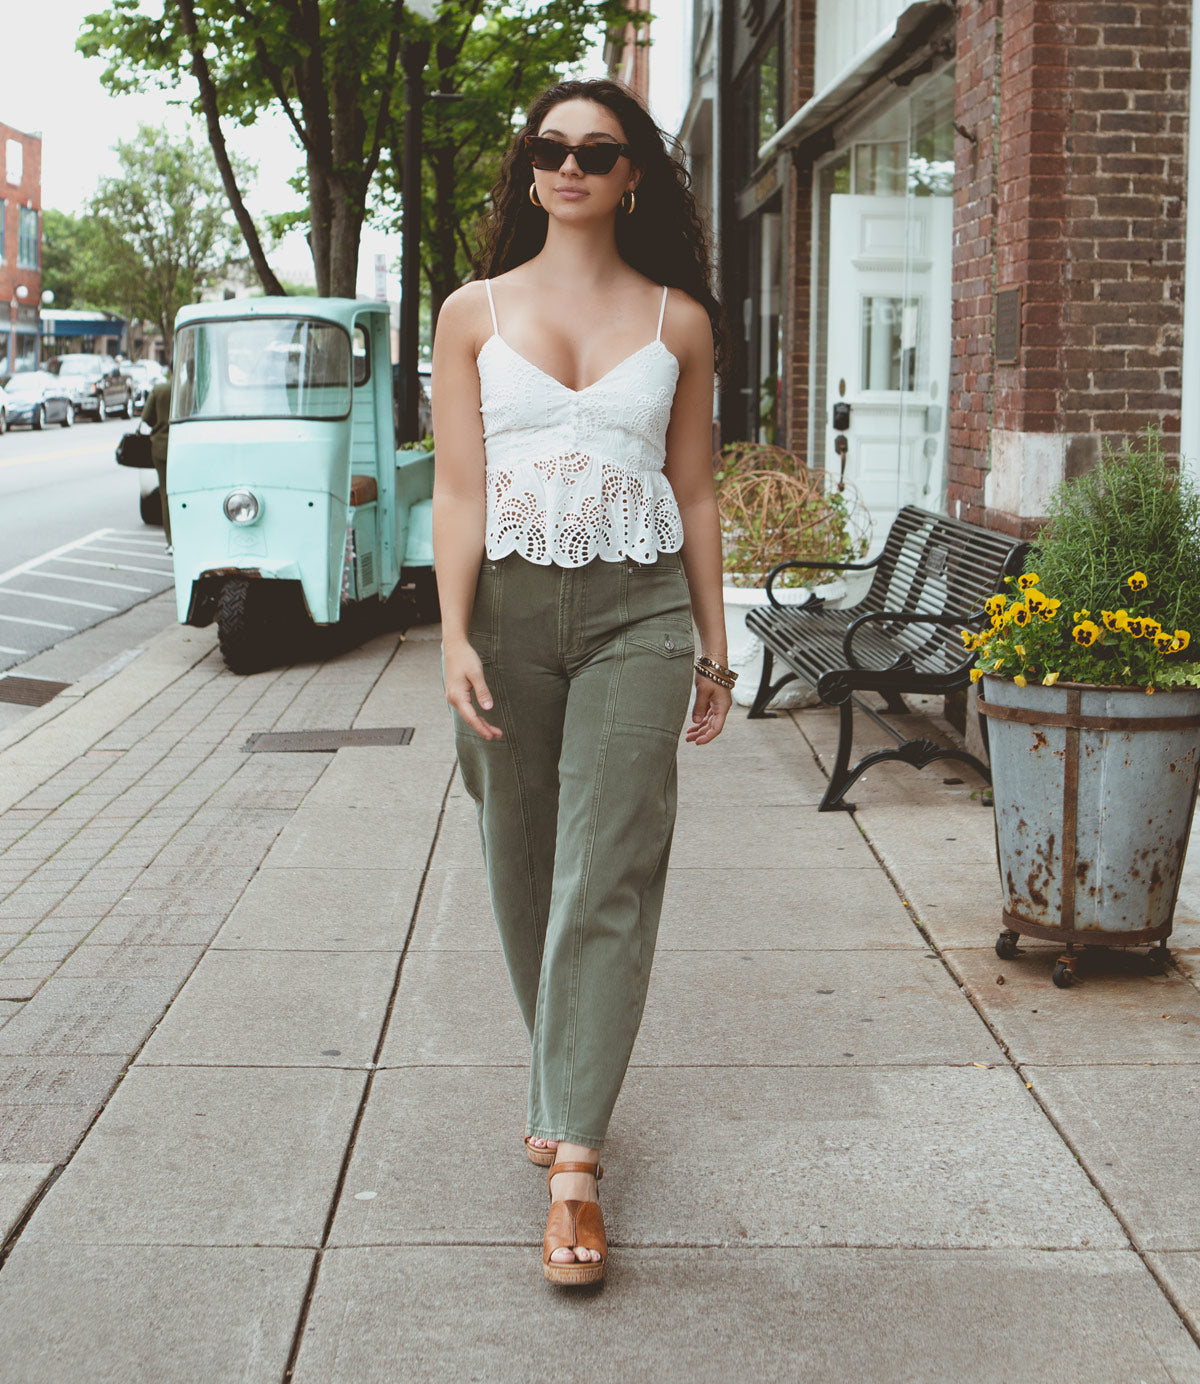 
                  
                    A woman wearing a white lace top and green pants walks down a sidewalk. She is wearing sunglasses and Roan Deduction wedge heels. A vintage turquoise vehicle and potted flowers are in the background.
                  
                